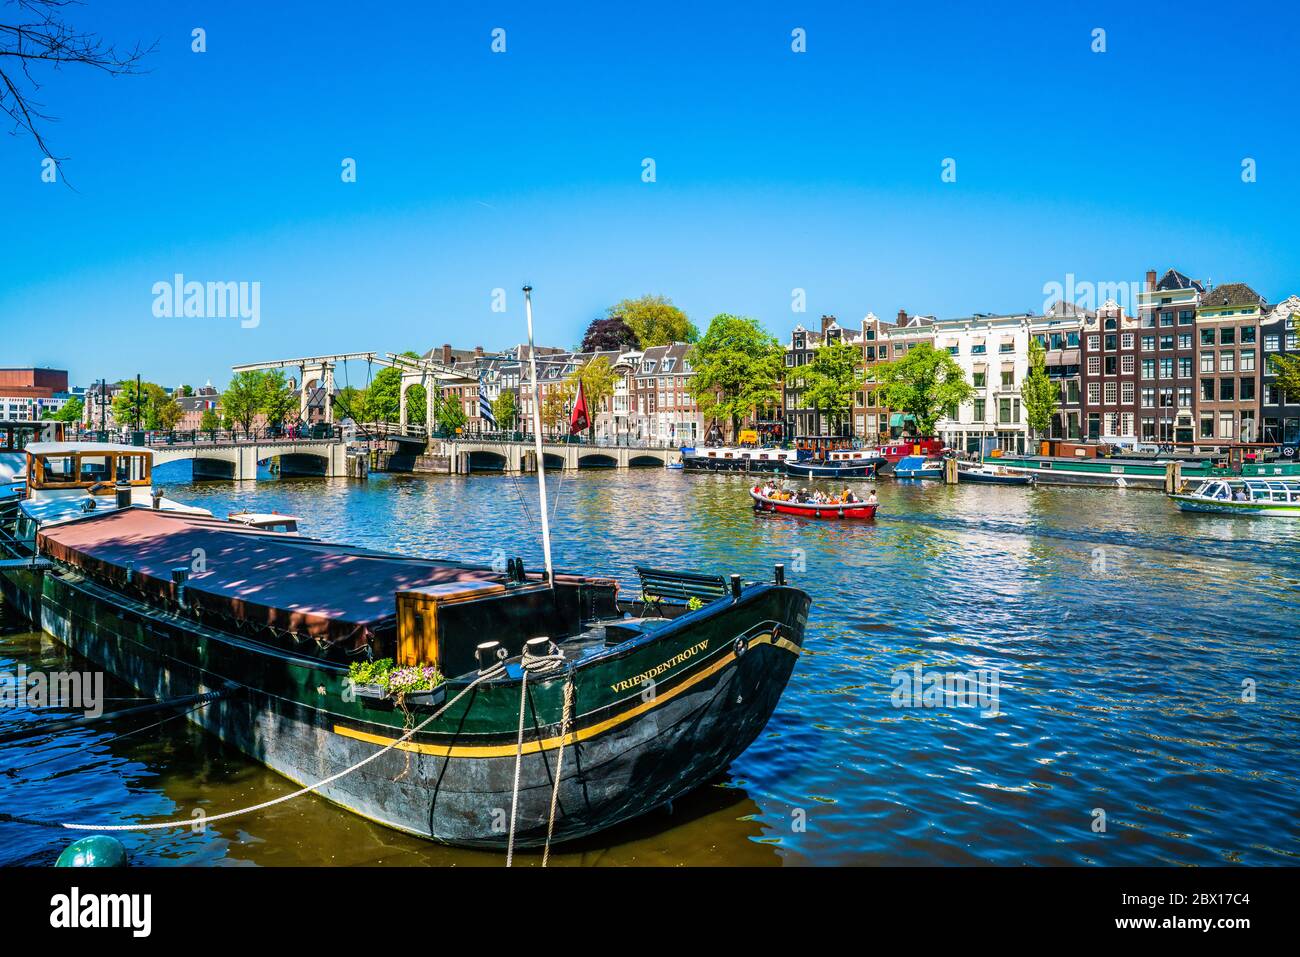 Amsterdam, May 7 2018 - view on the river Amstel filled with small boats and the Magere brug (skinny bridge) in the background on a summer day Stock Photo